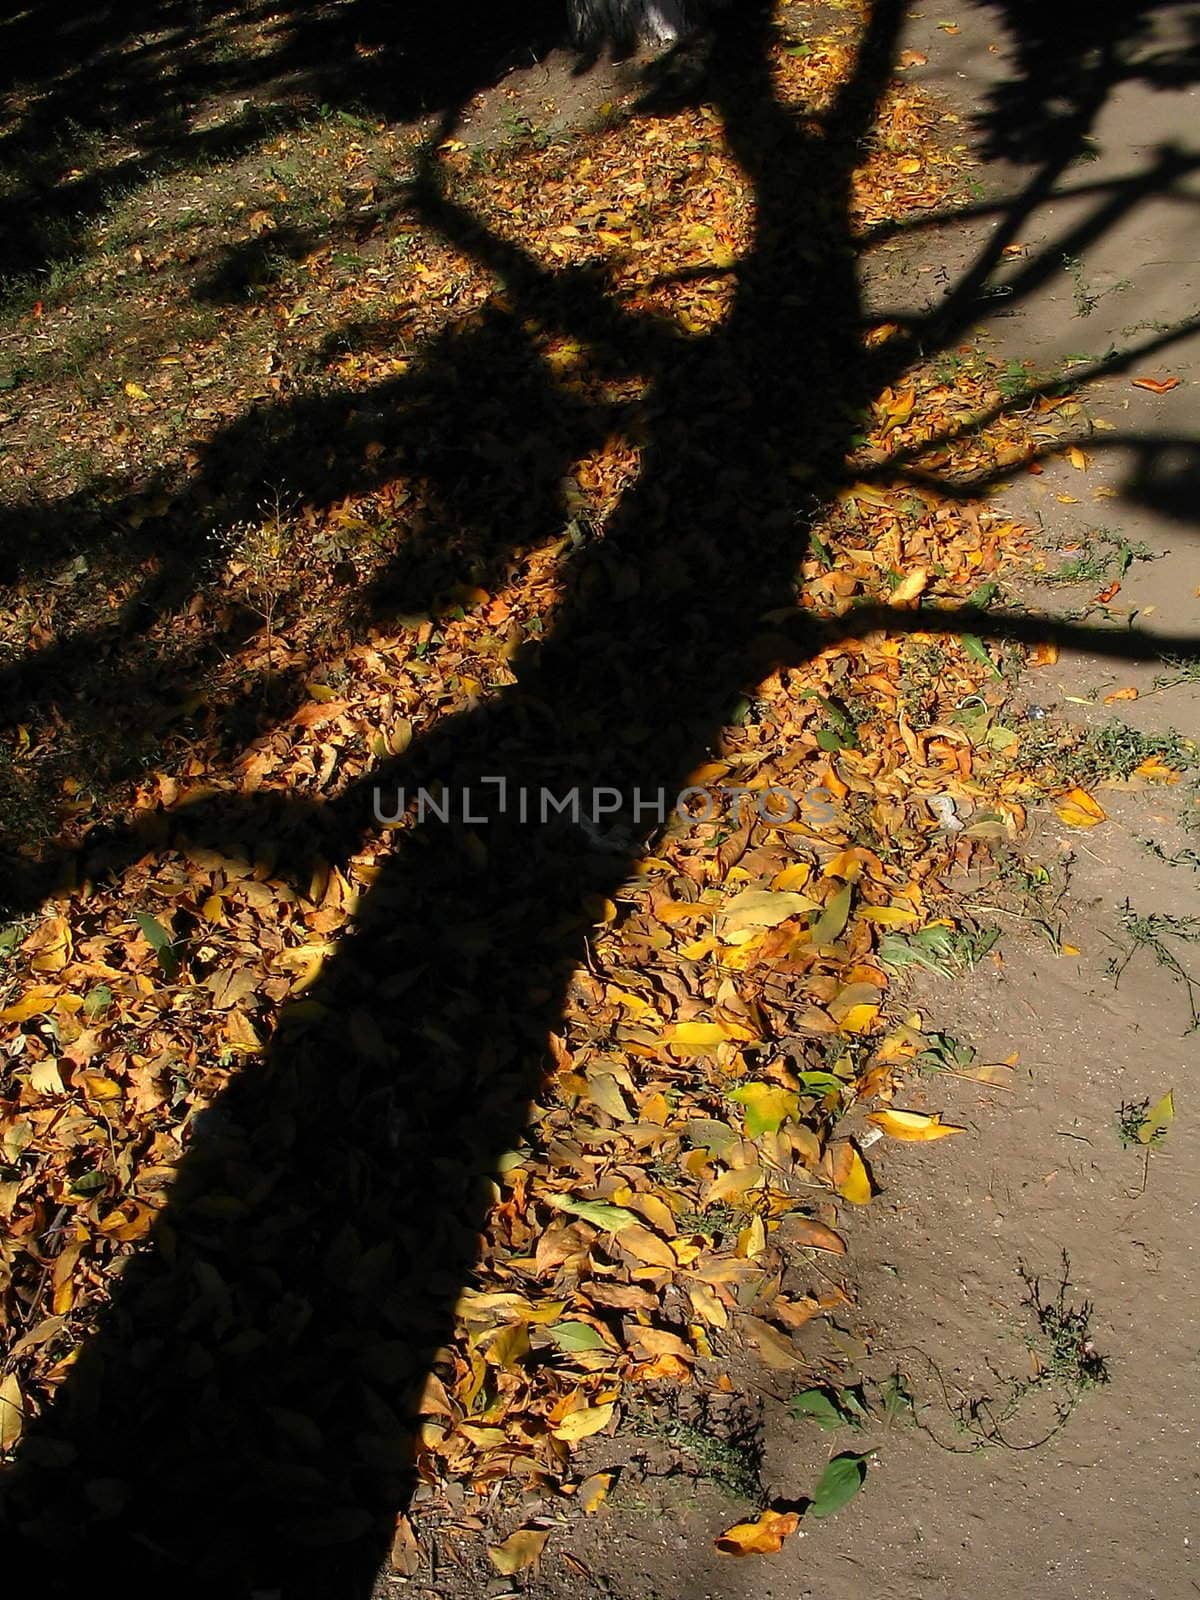 Shadow of the tree on the ground